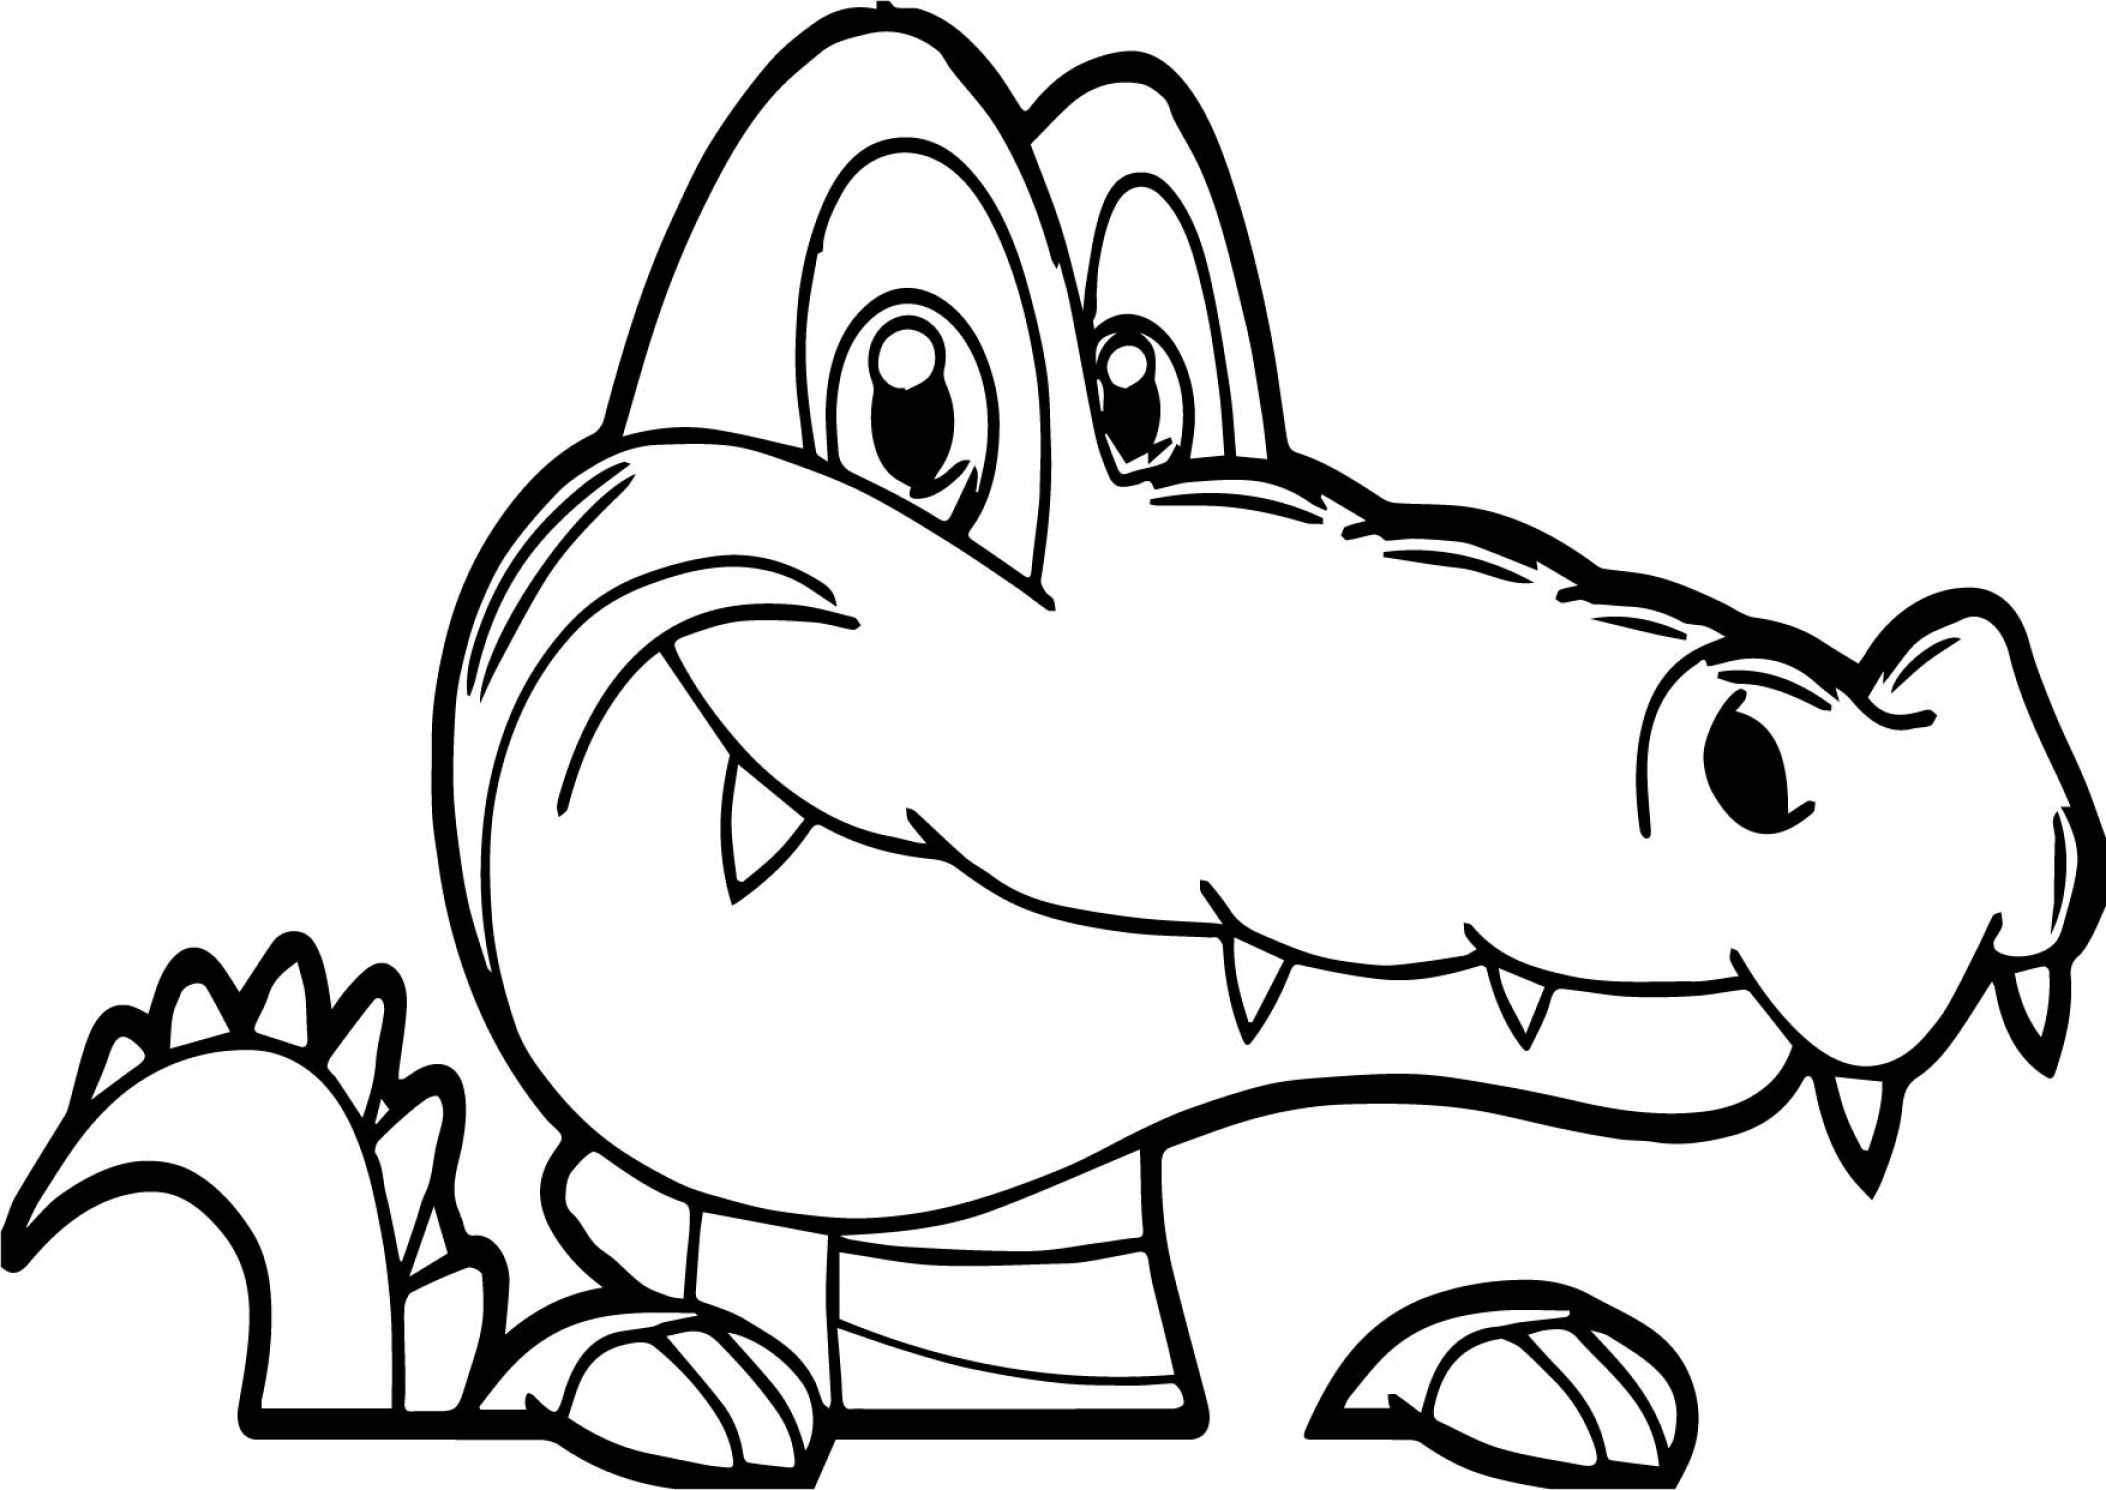 Coloring Page Alligator Cartoon Alligator Coloring Pages Colouring For Fancy Draw Crocodile